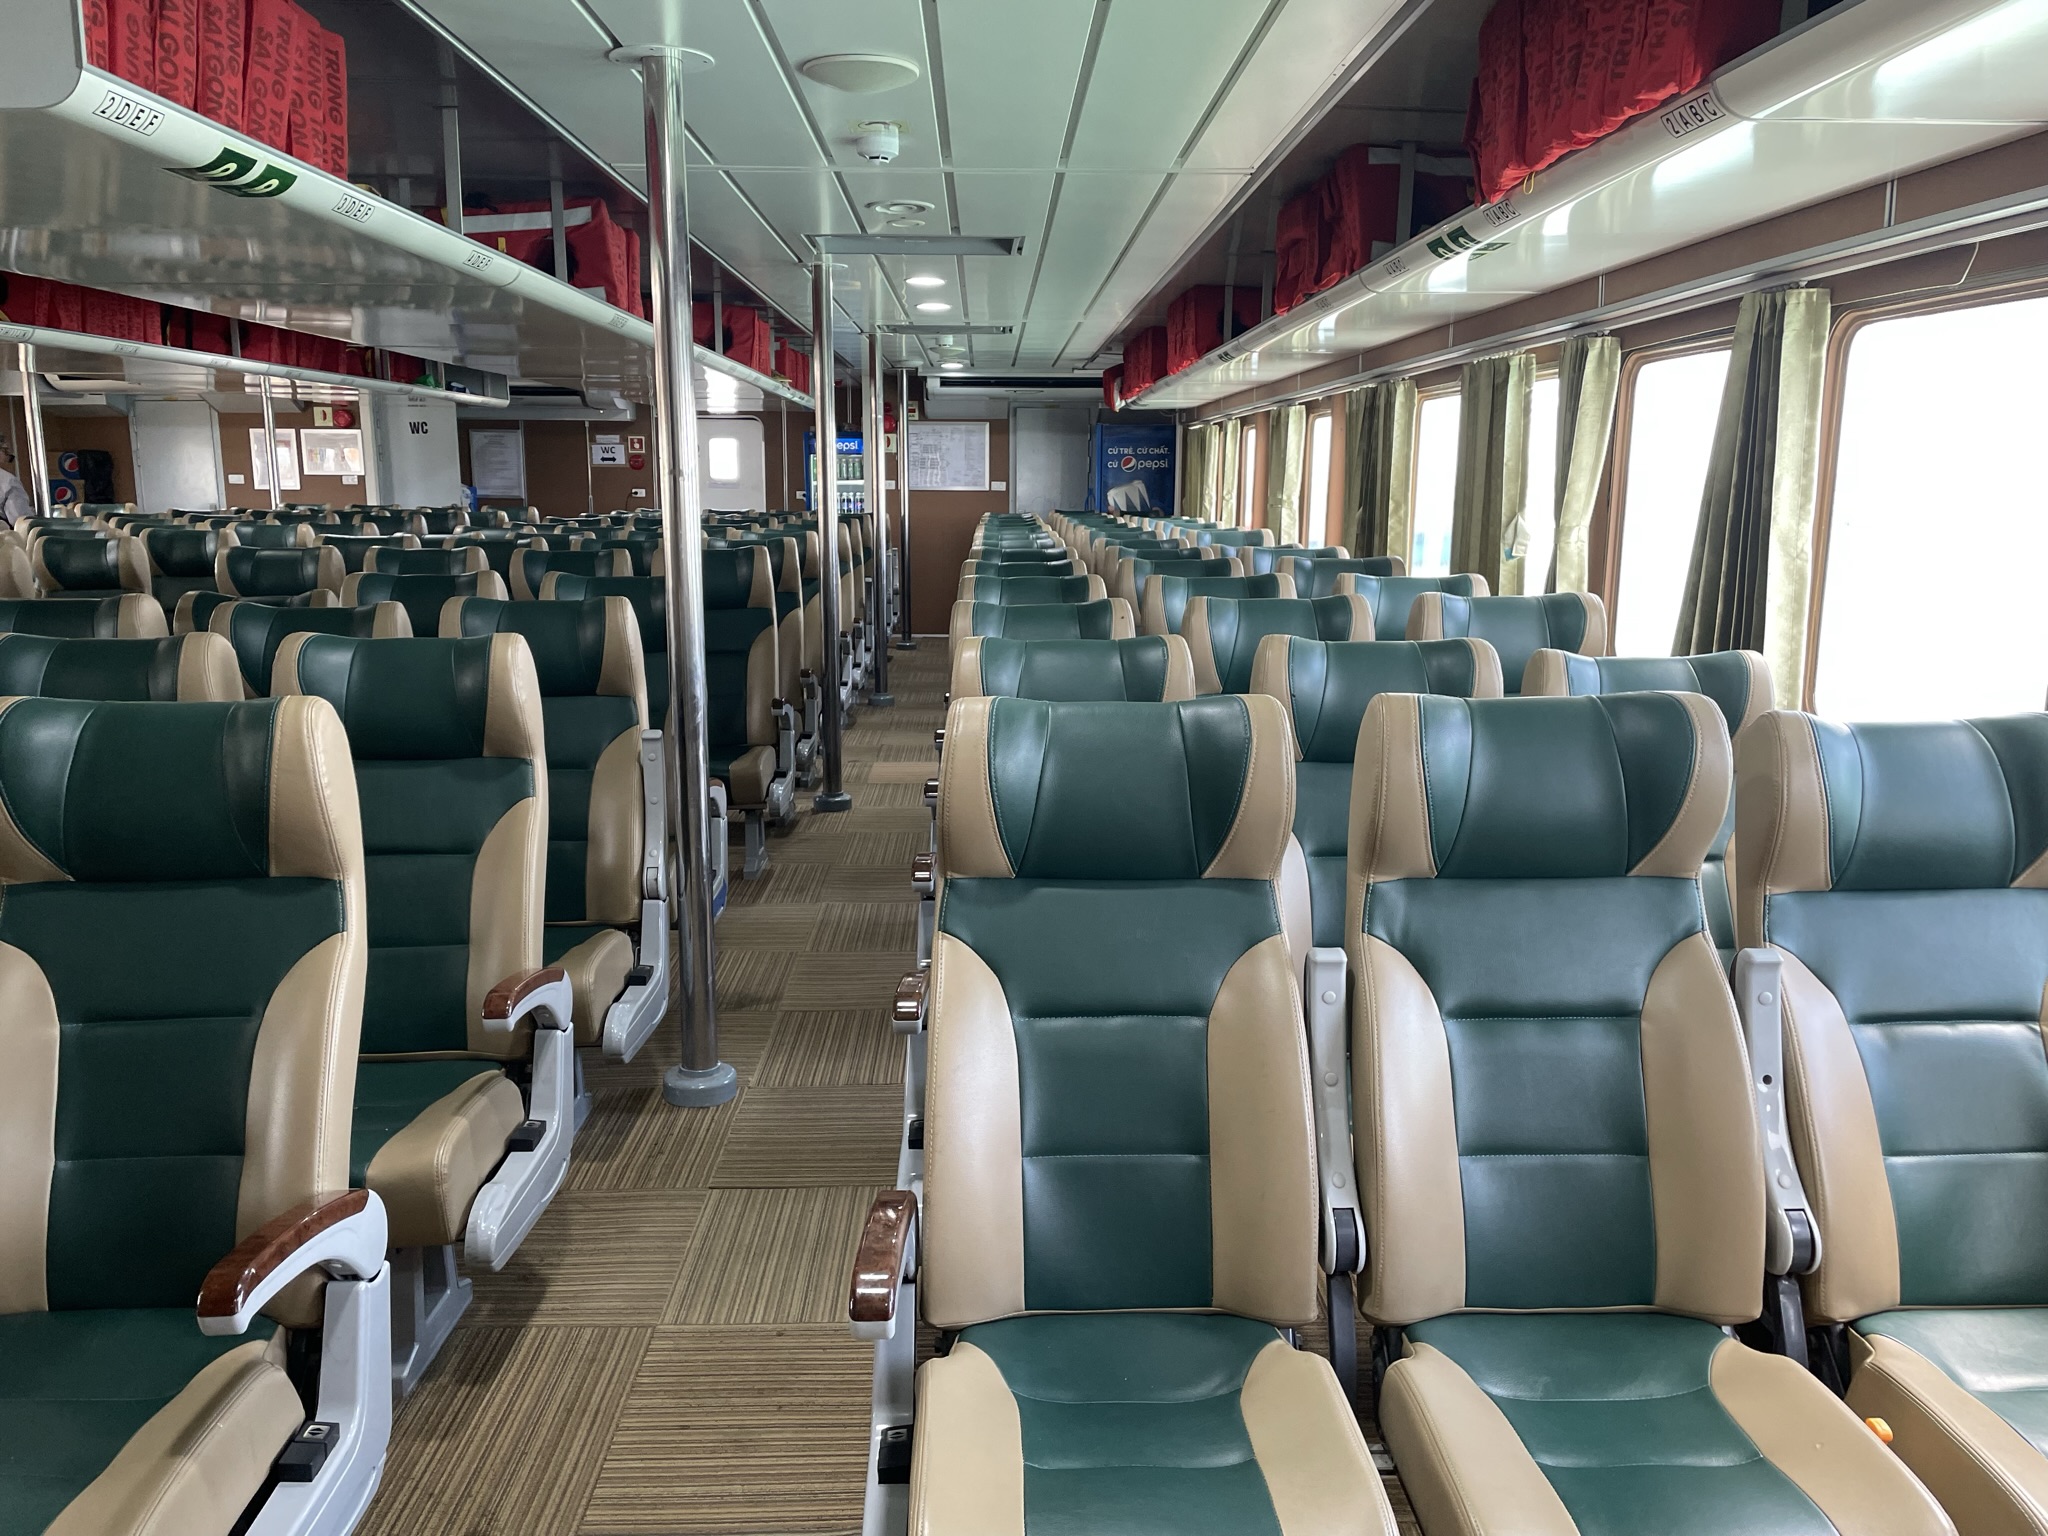 Information about Seat Classes on Trung Trac Phu Quy High-Speed Boat